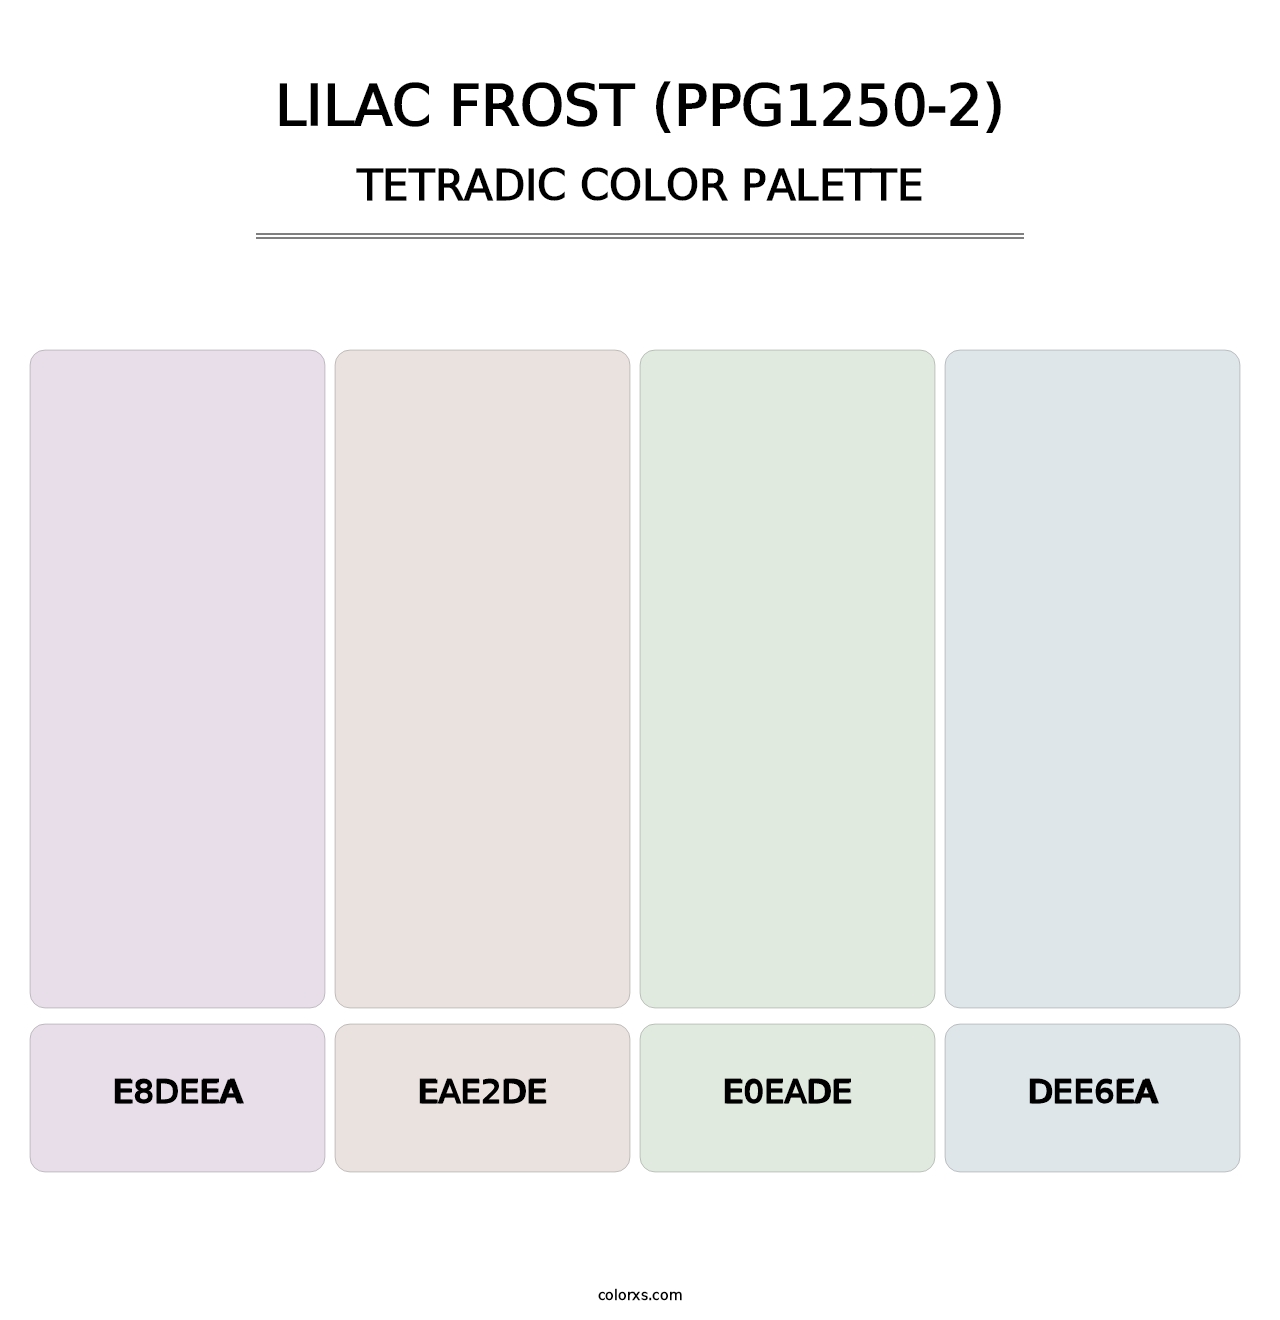 Lilac Frost (PPG1250-2) - Tetradic Color Palette